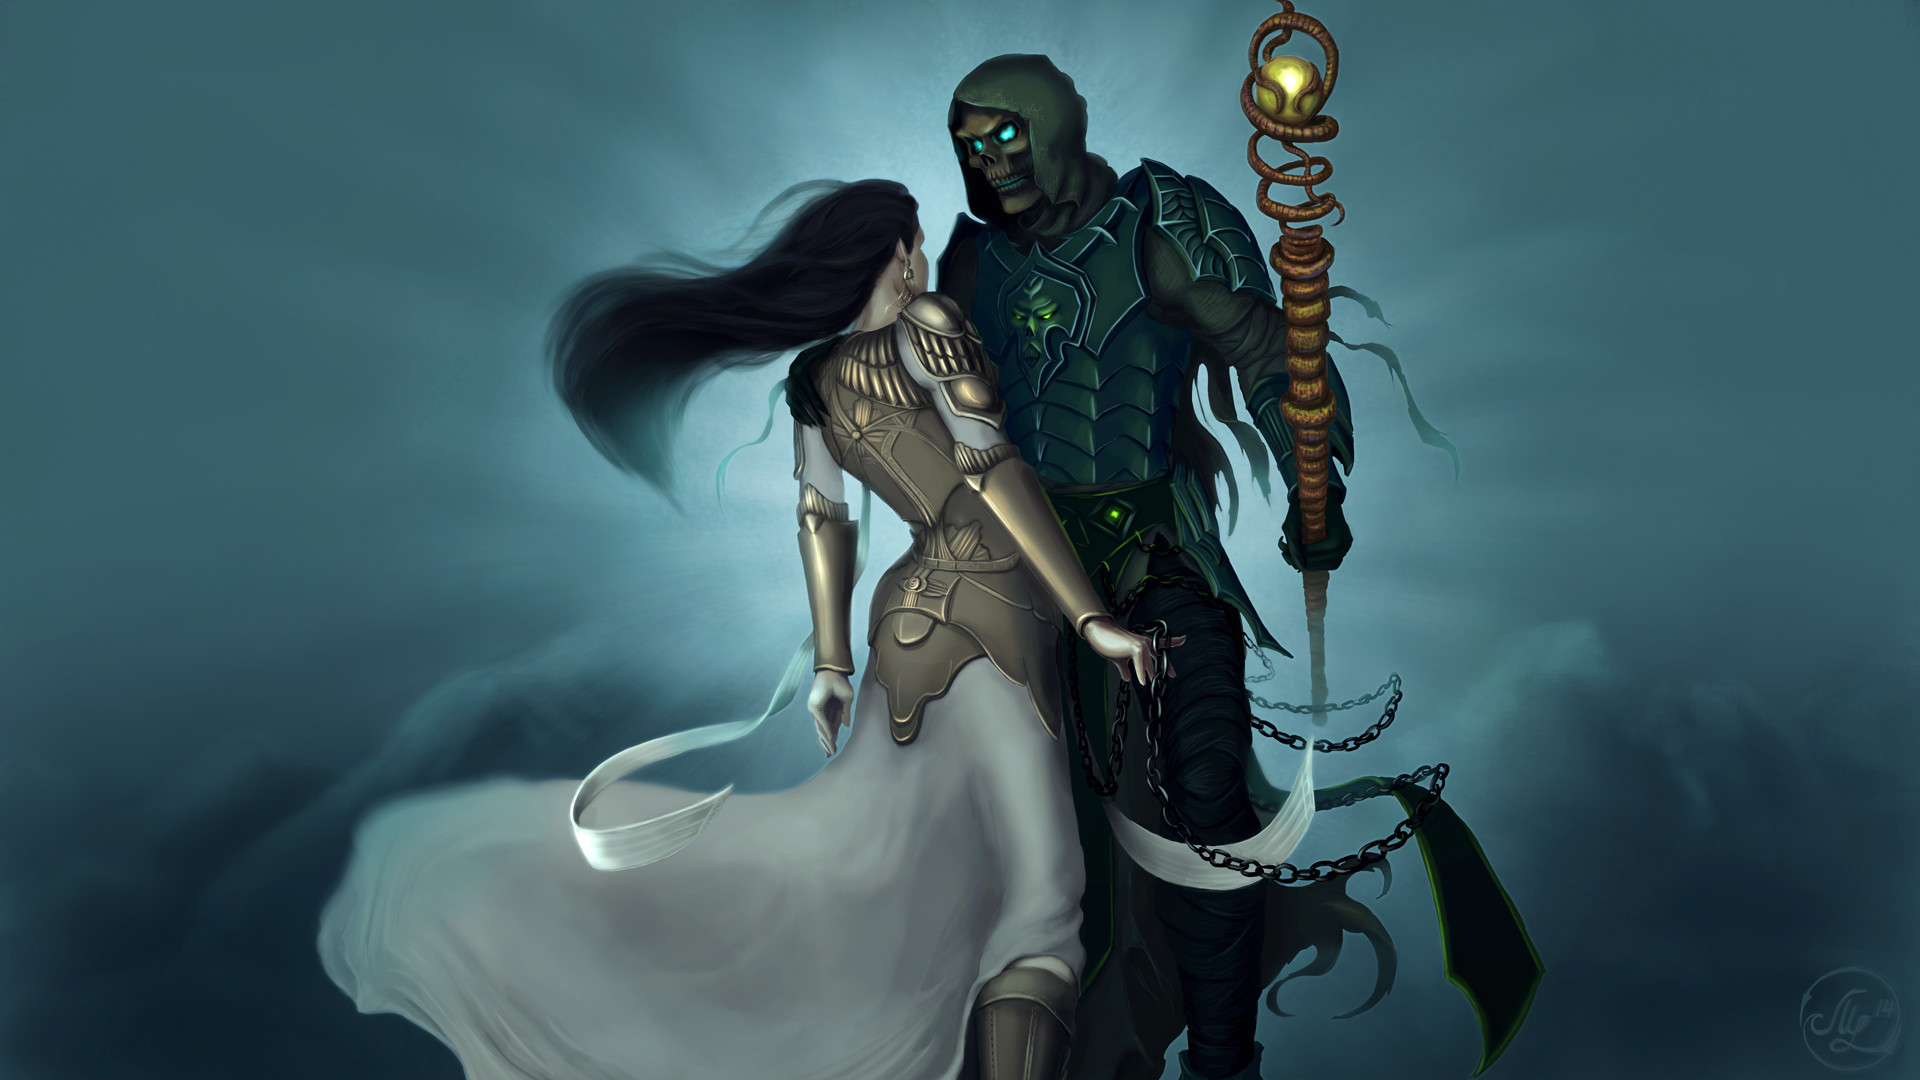 1920x1080 ... Danse Macabre (Might and Magic Heroes 6) by Melissa-light